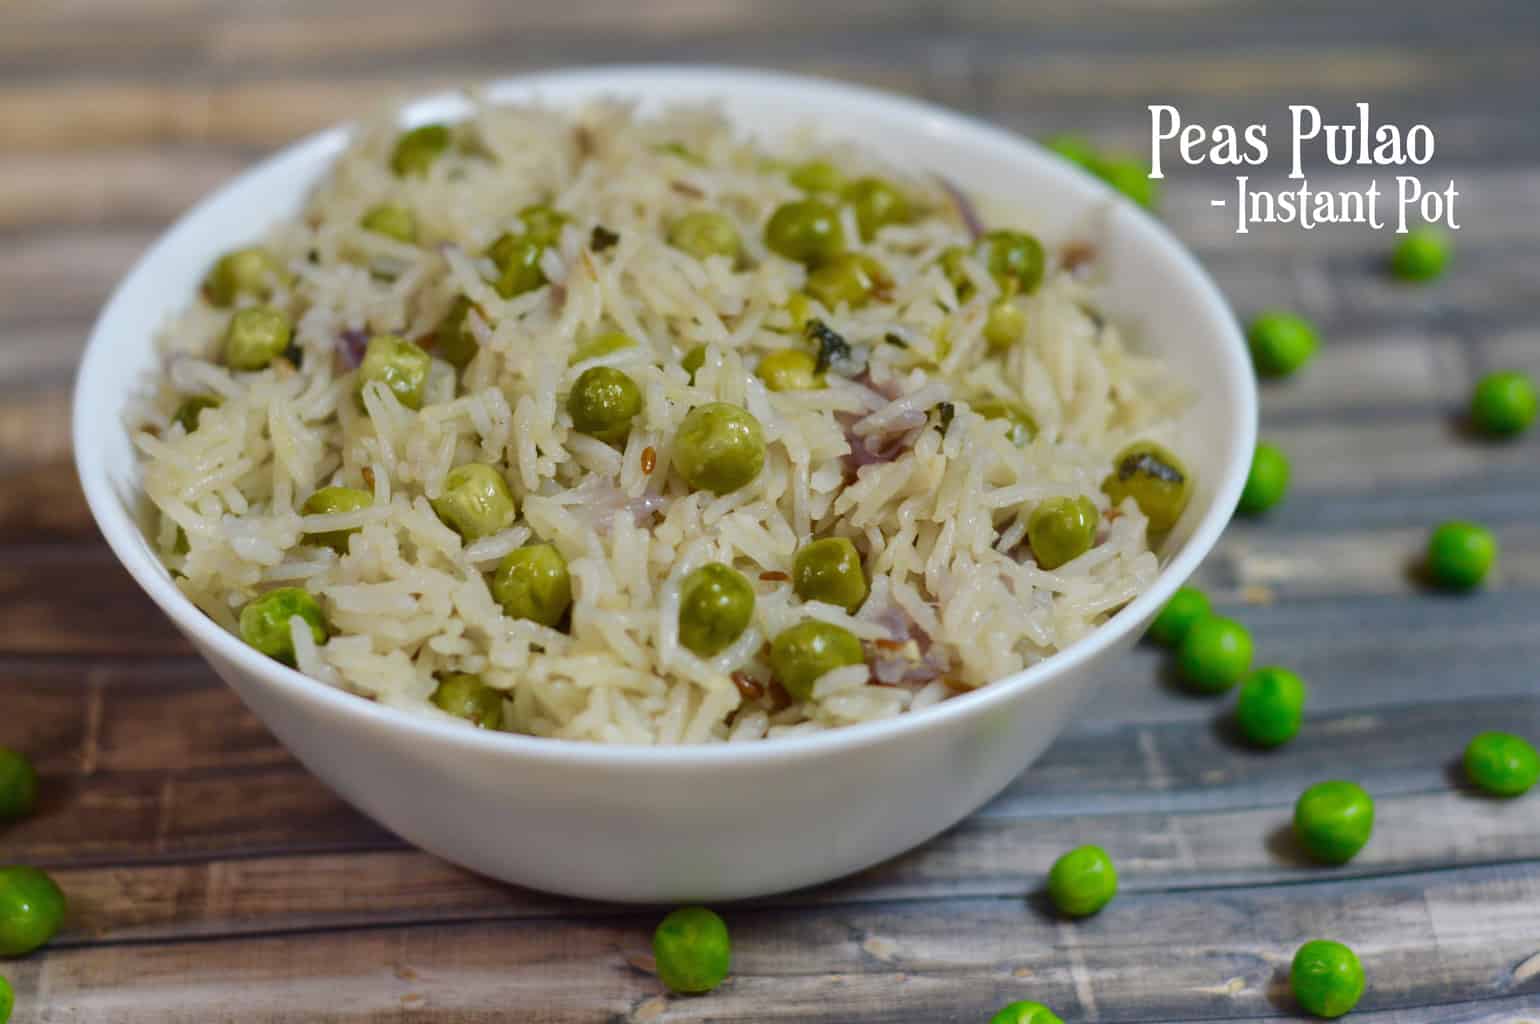 Instant Pot Peas Pulao served in a white bowl with few green peas fallen on the sheet